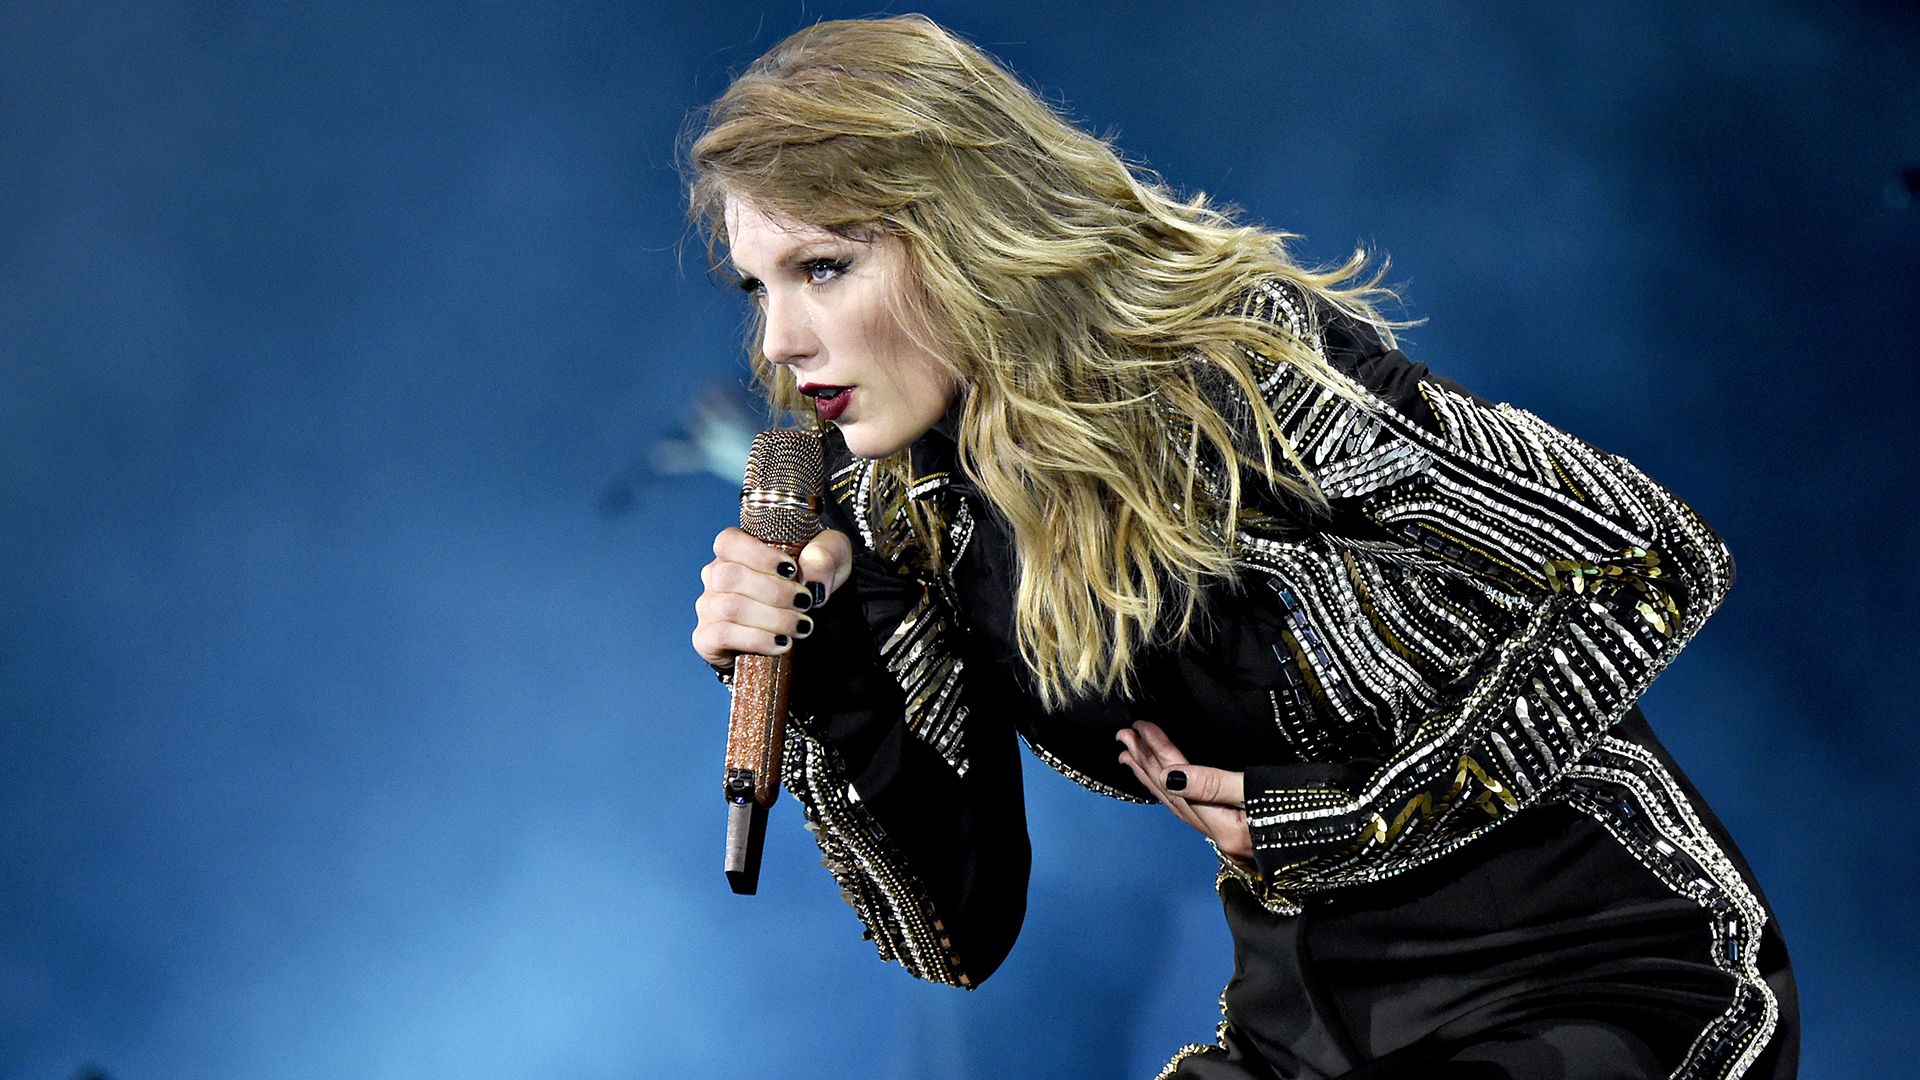 Taylor Swift Throws Used Tissue into Crowd: Video